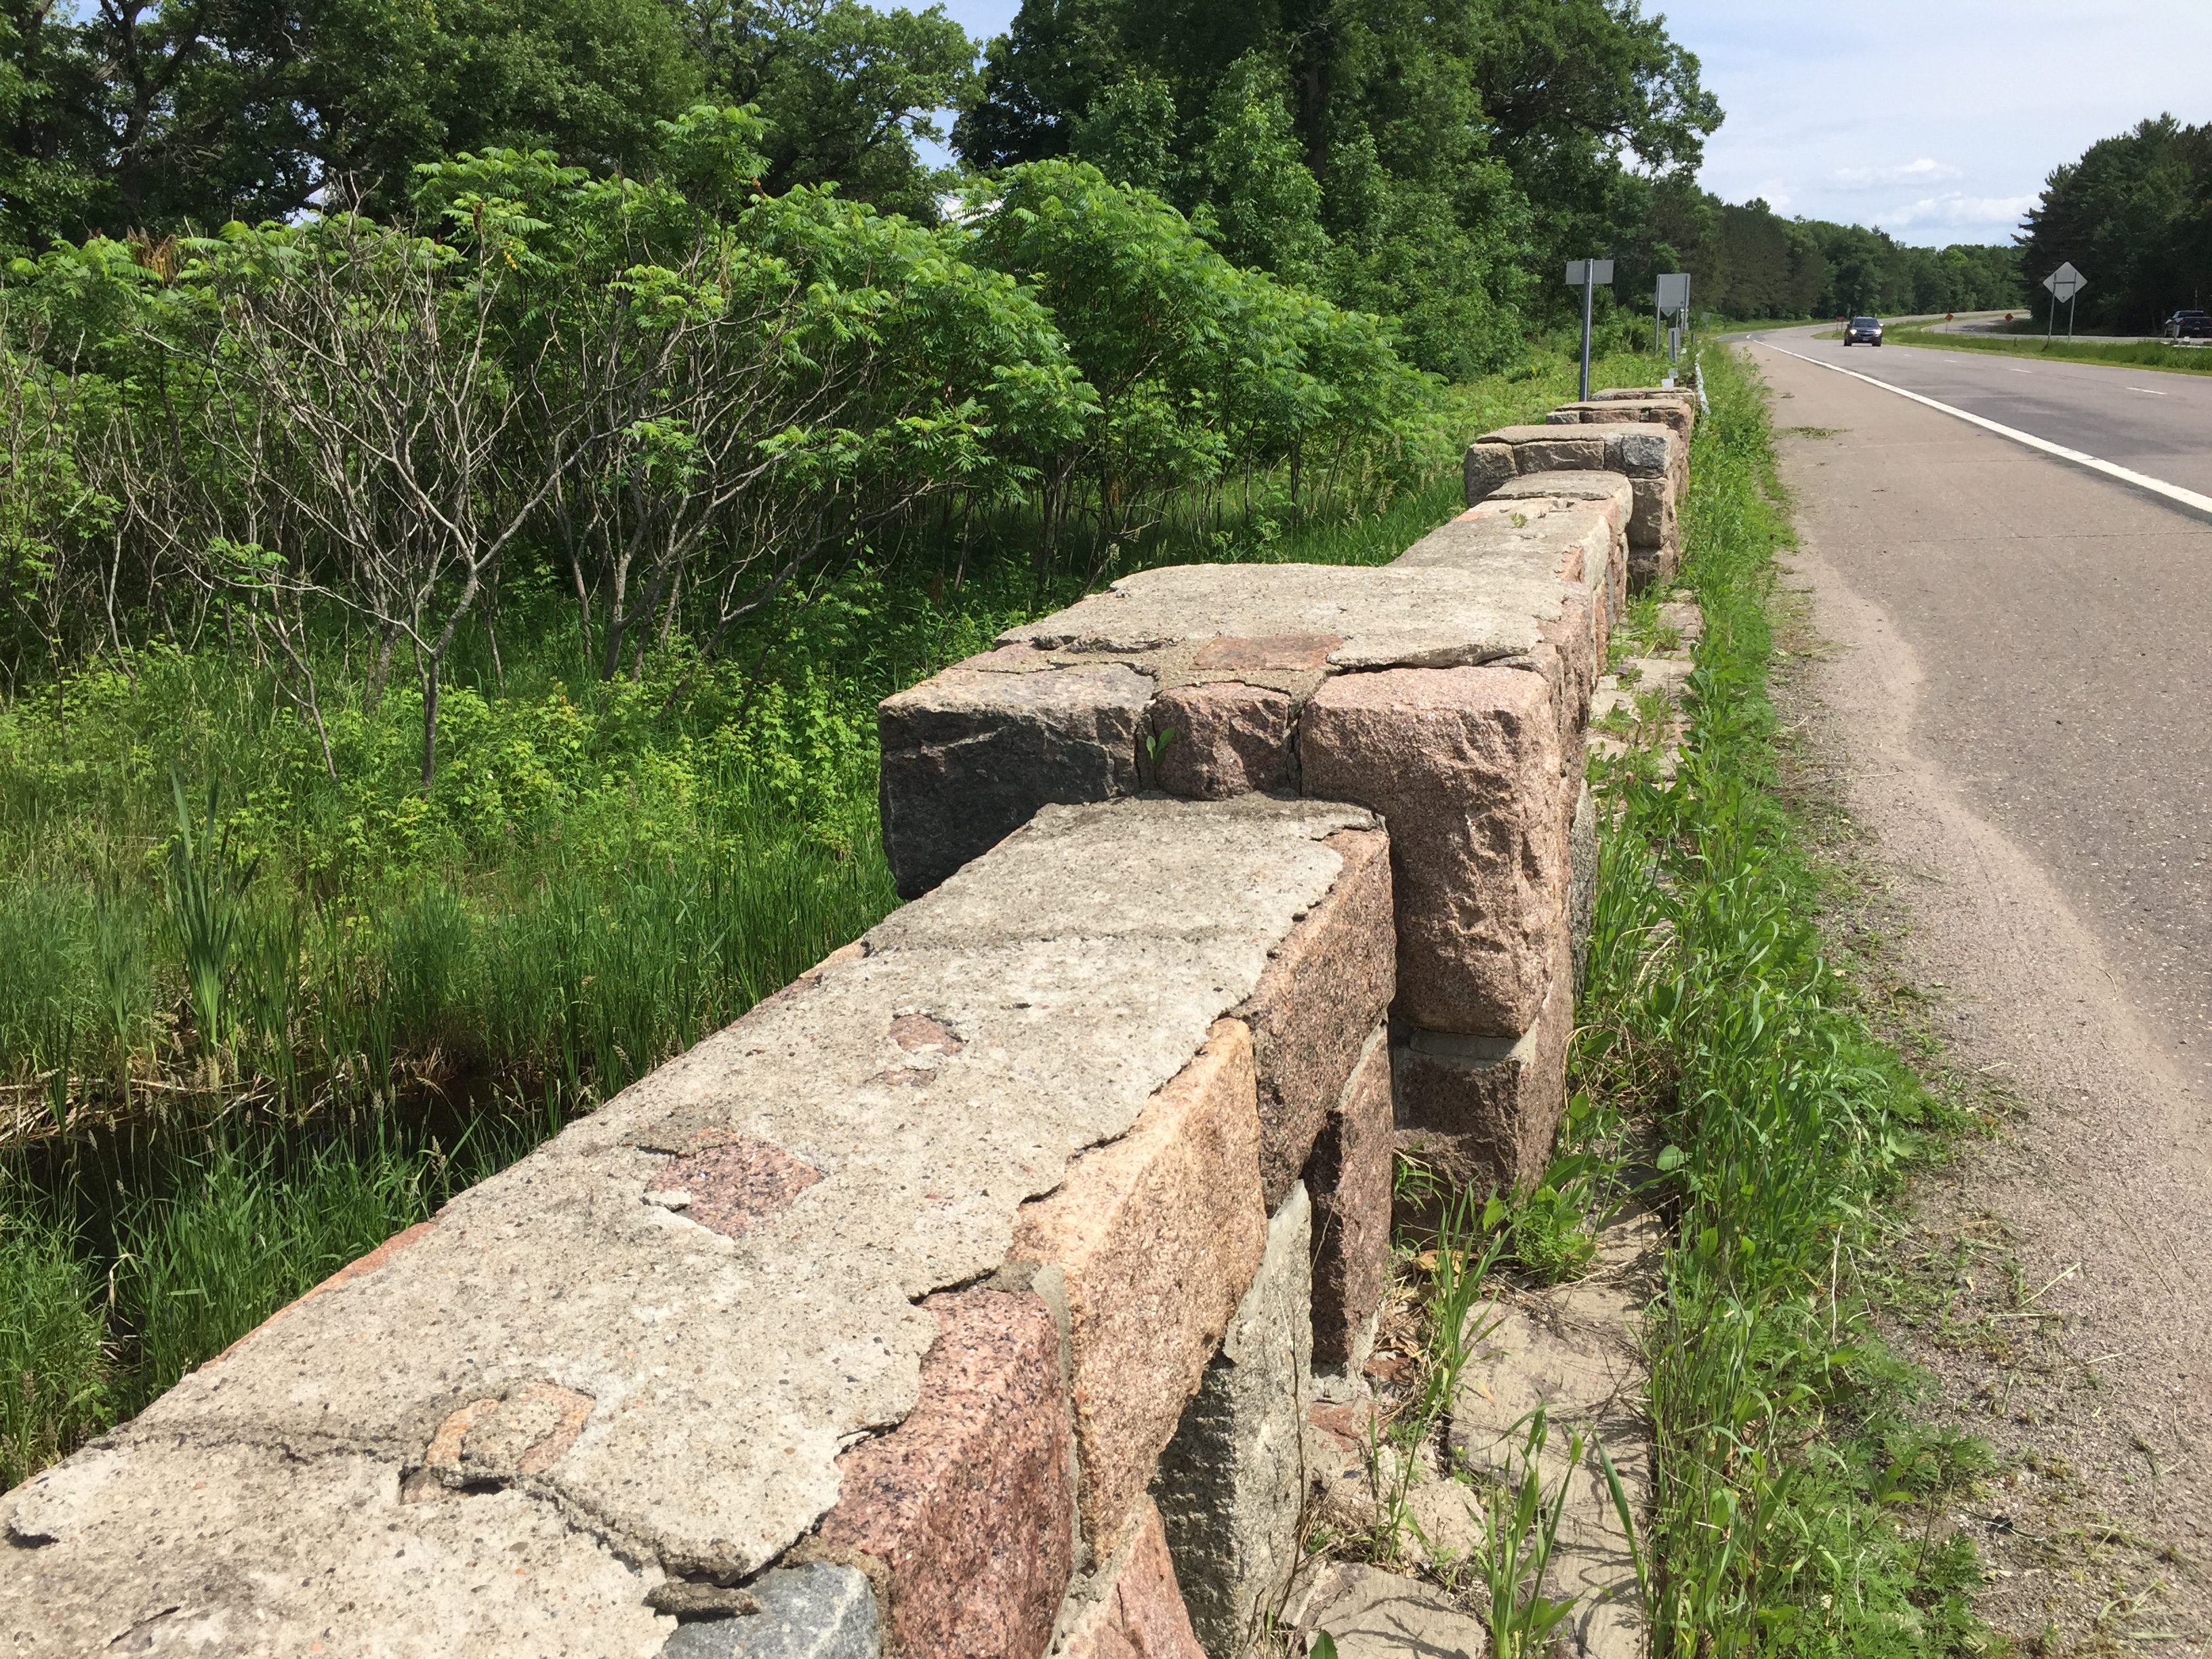 Preconstruction photo of the inside face of the East wall of the bridge. Notice the cracked mortar cap, different colors of mortar, vegetation growing in mortar joints in wall and at base of wall in flagstone pavers at the base of the wall. June 2018.